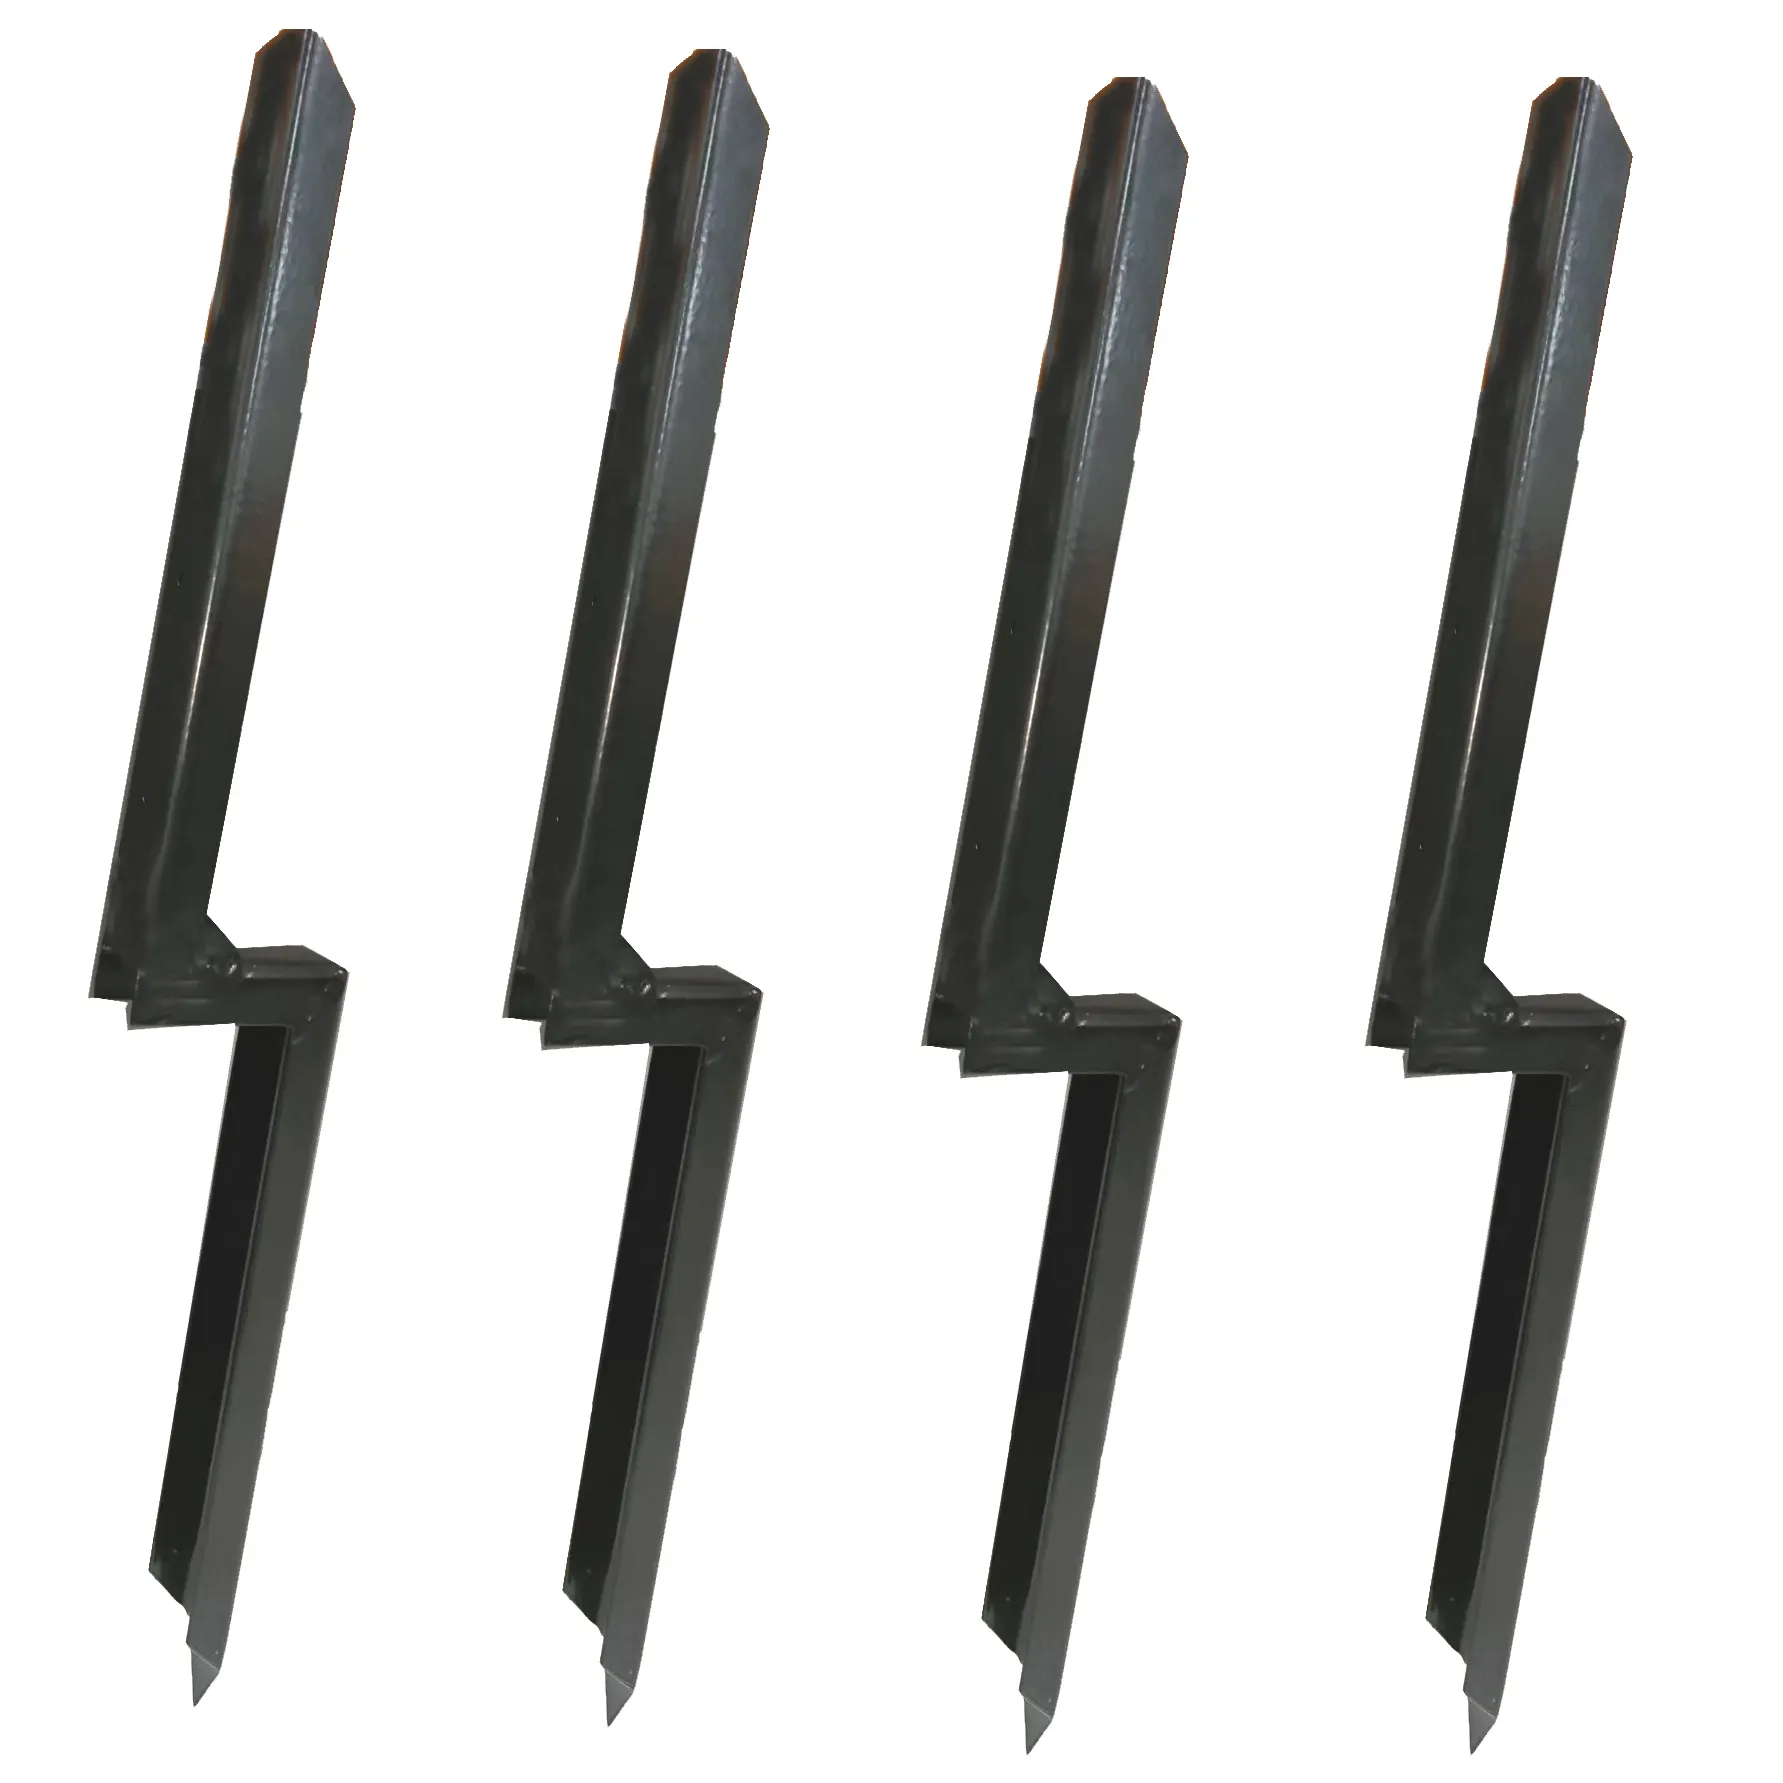 Heavy Duty Fence Post Spike,Fence Post Repair Stake,Ground Spike for Repair Tilted Wood Fence Post